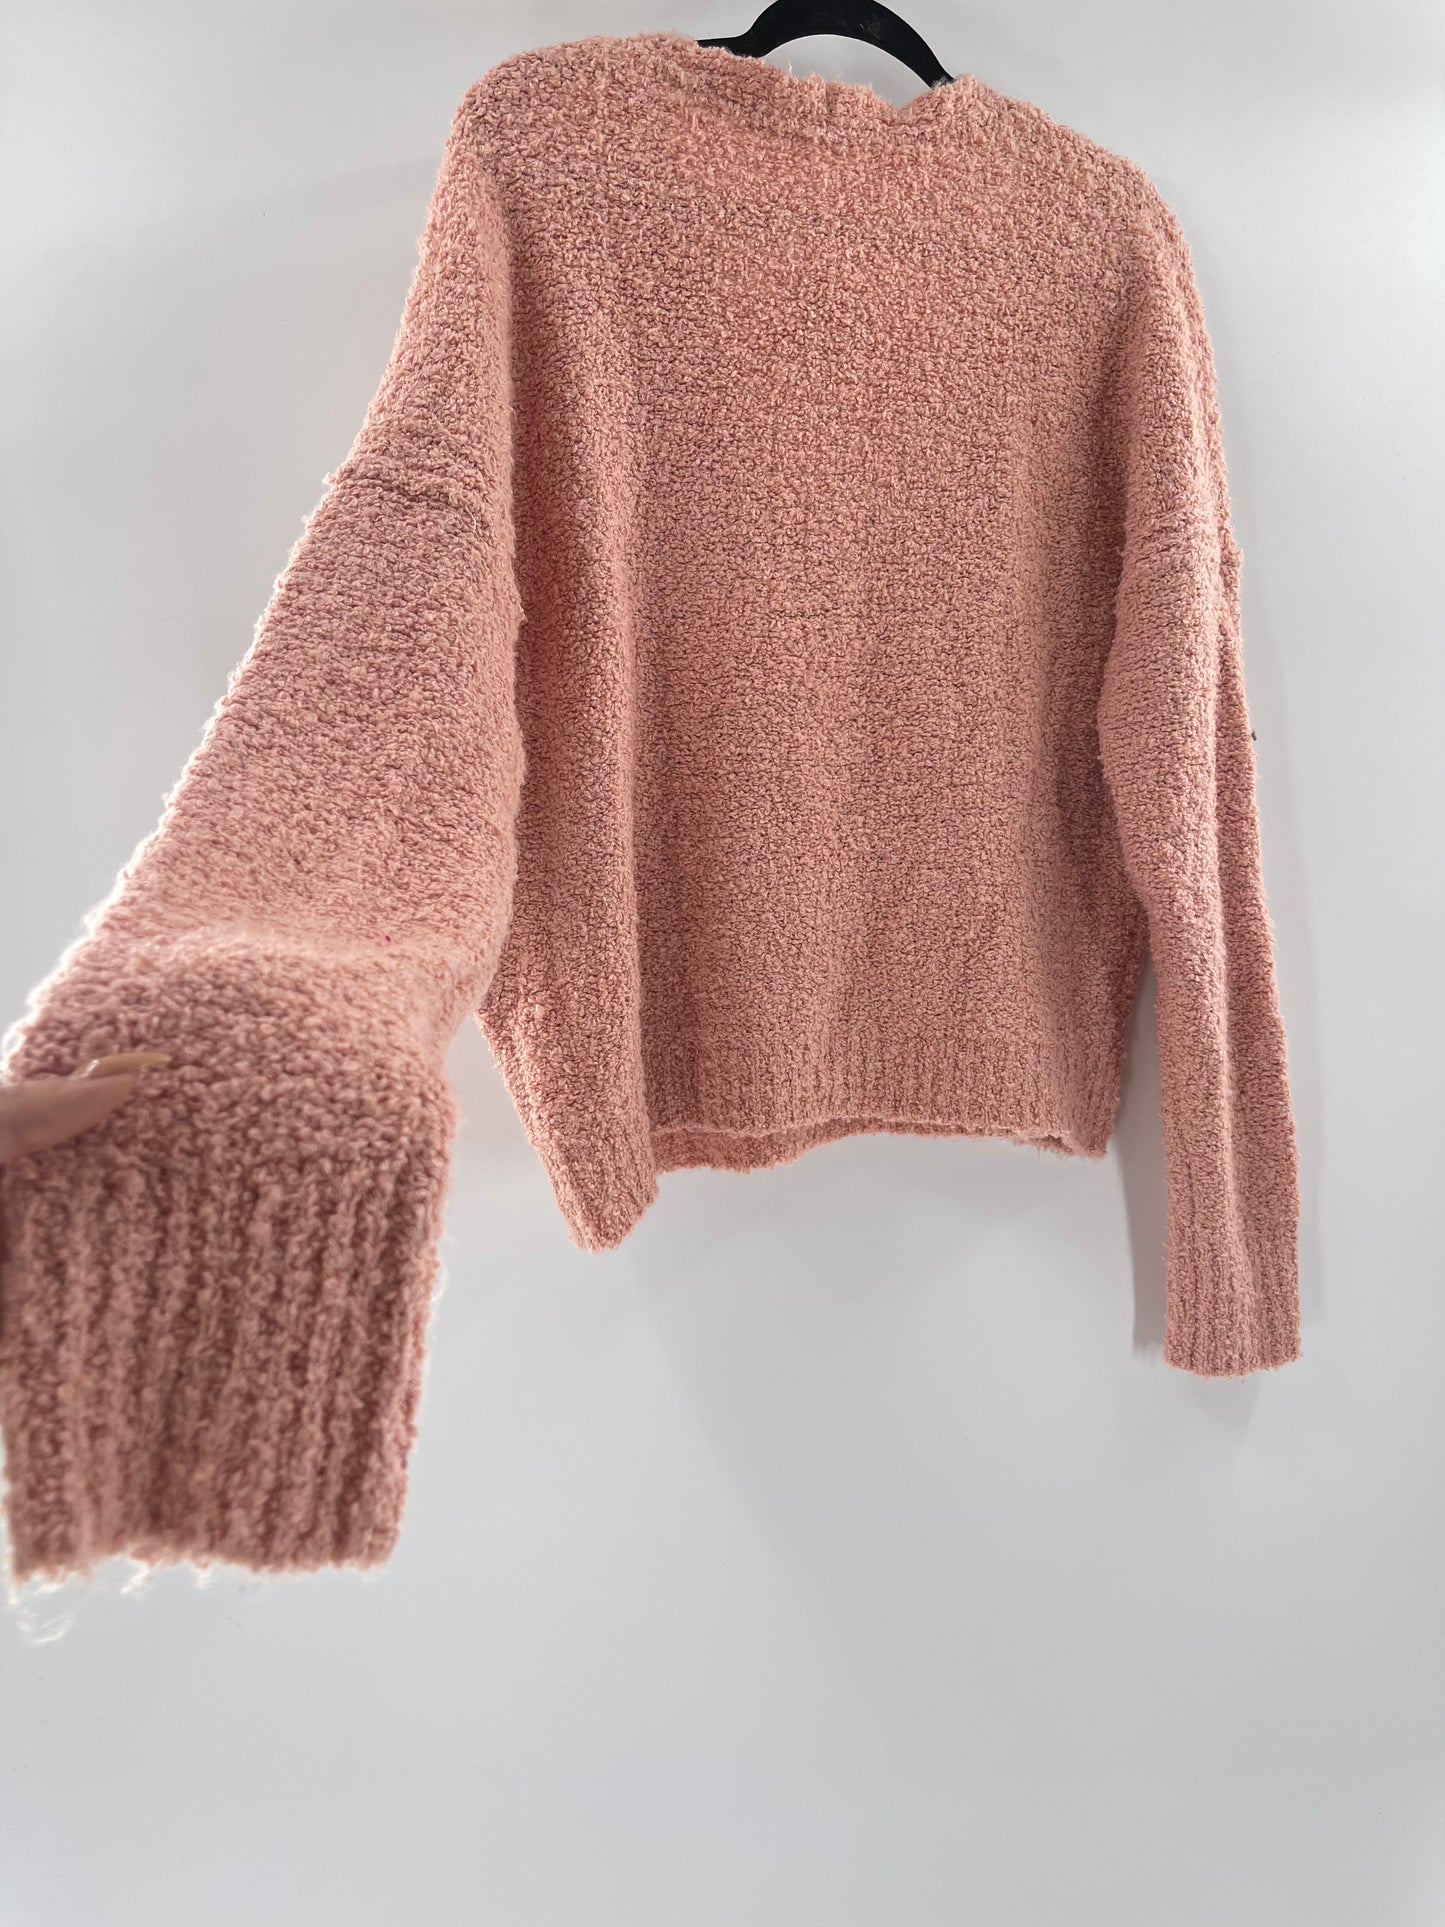 Free People Pink Sweater (S)